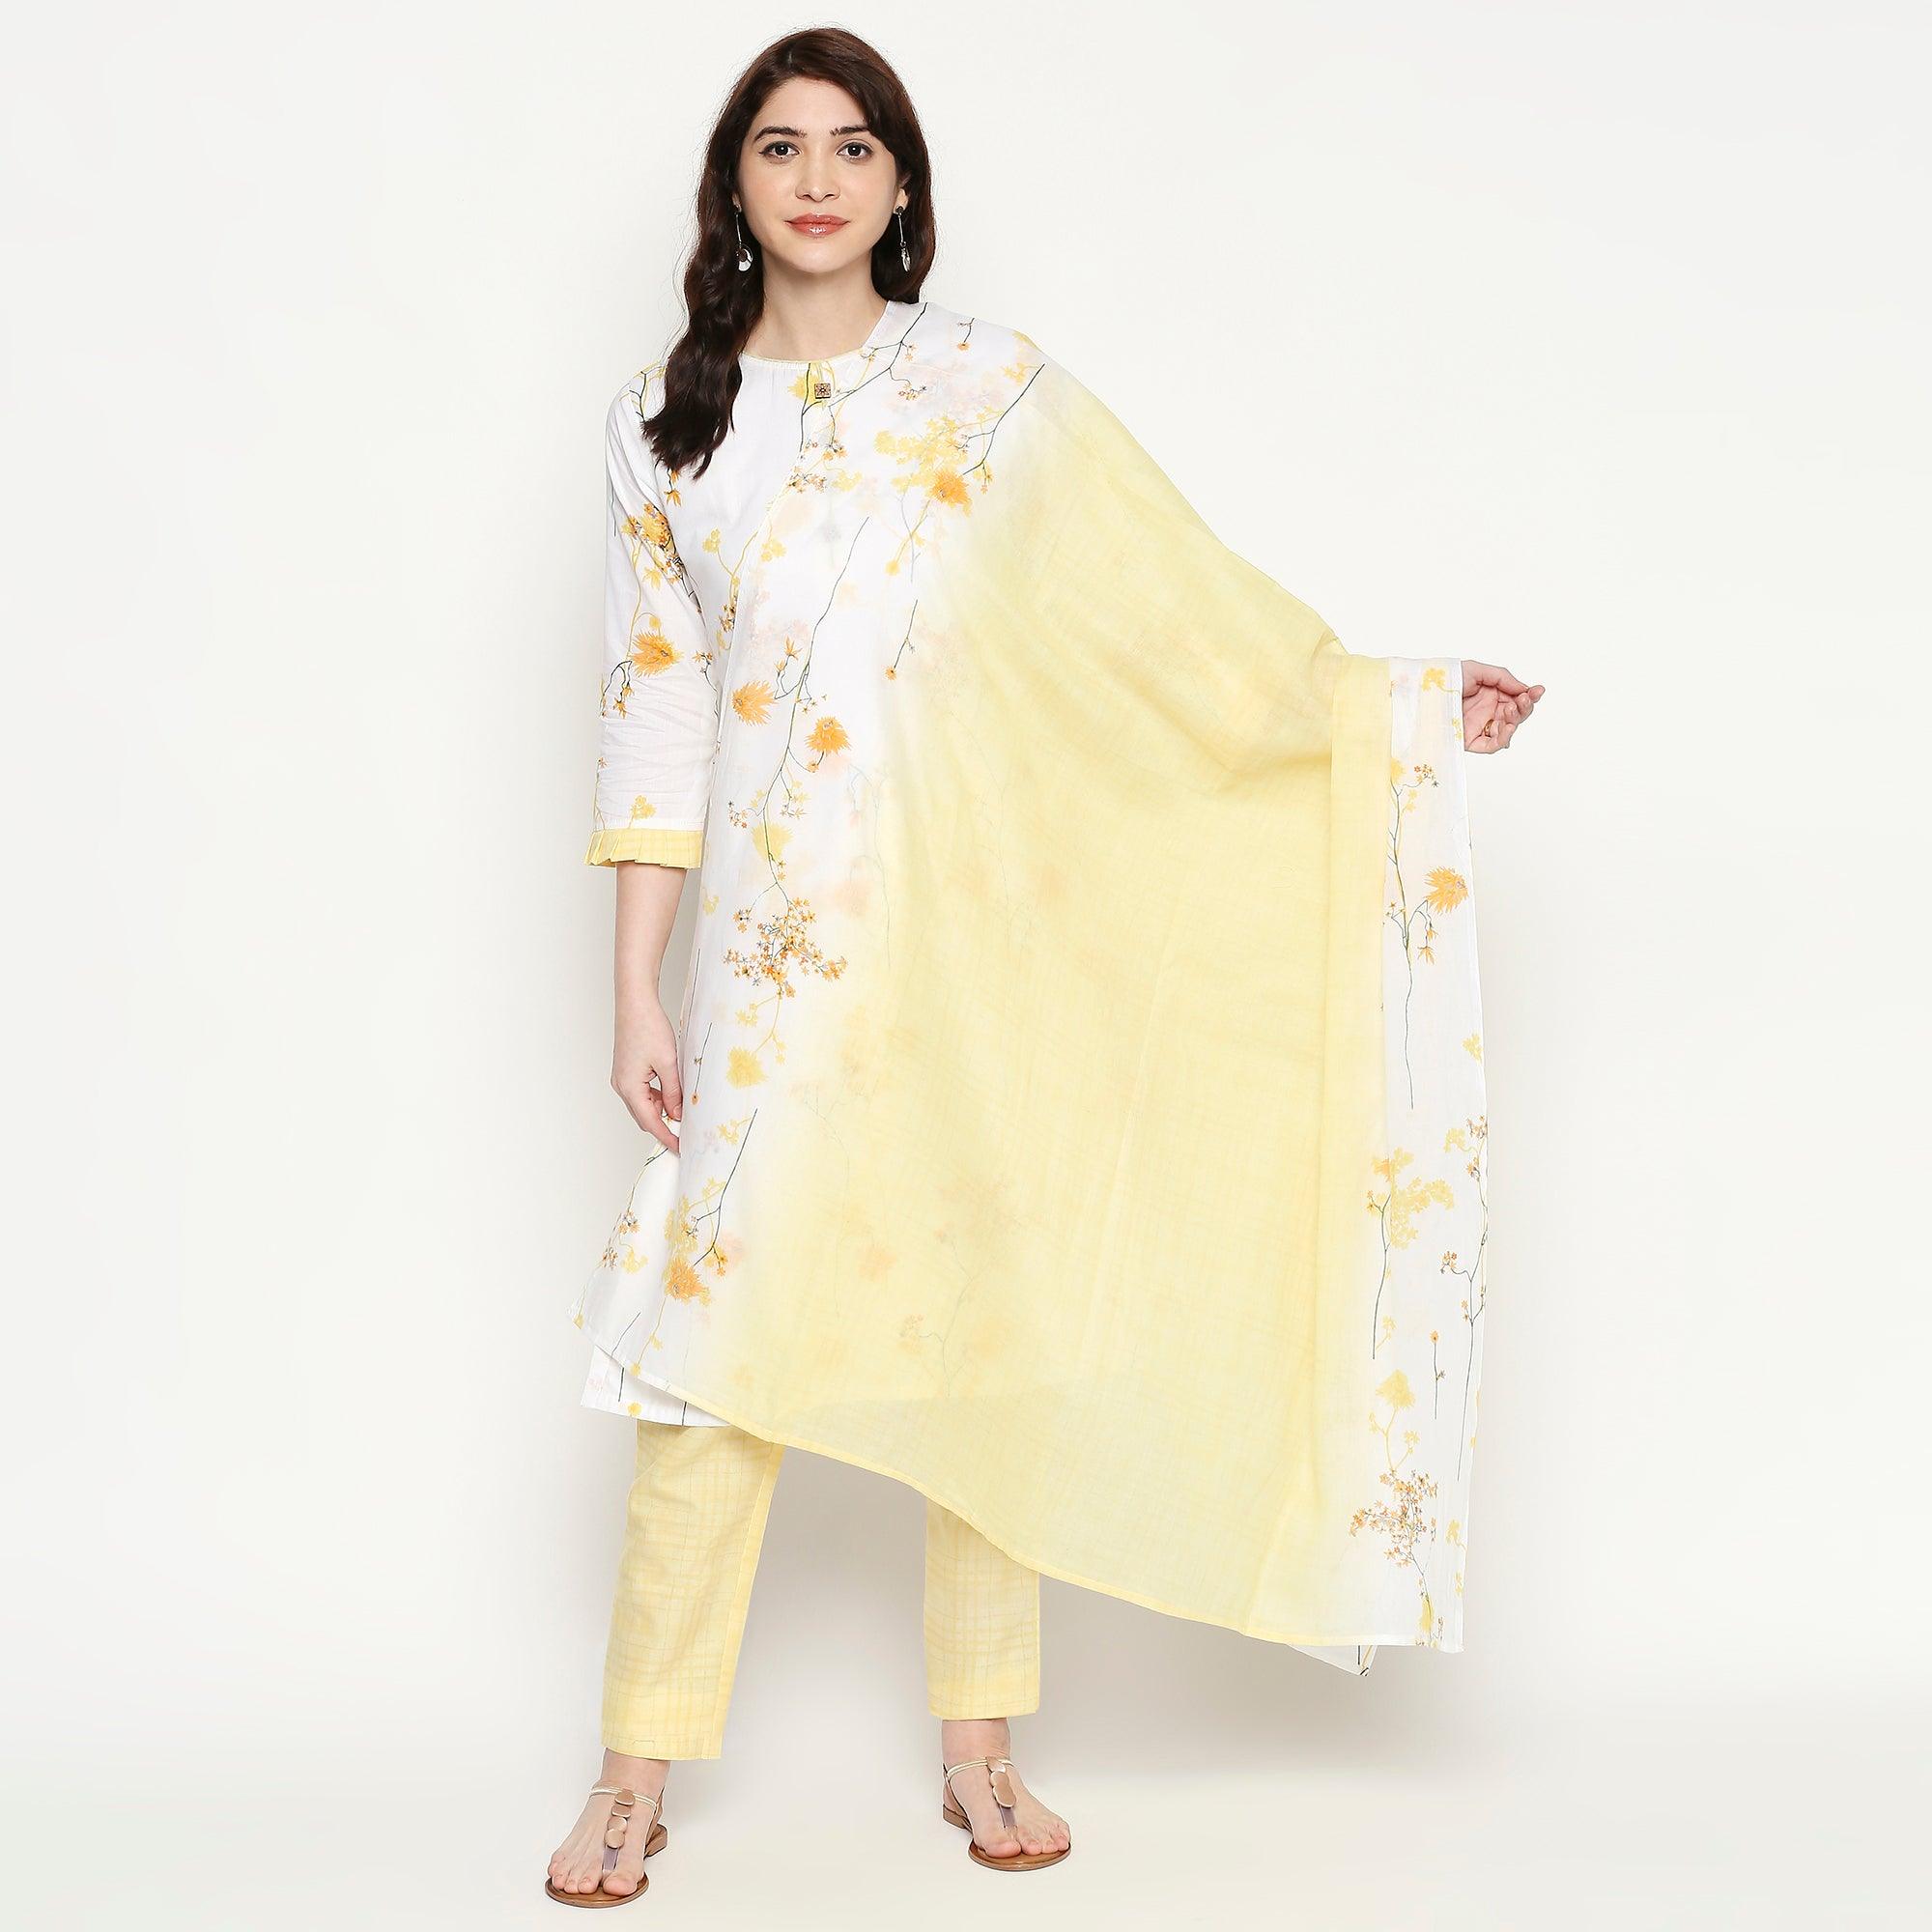 Blooming White-Yellow Colored Casual Wear Floral Printed Cotton Kurti-Pant Set With Dupatta - Peachmode